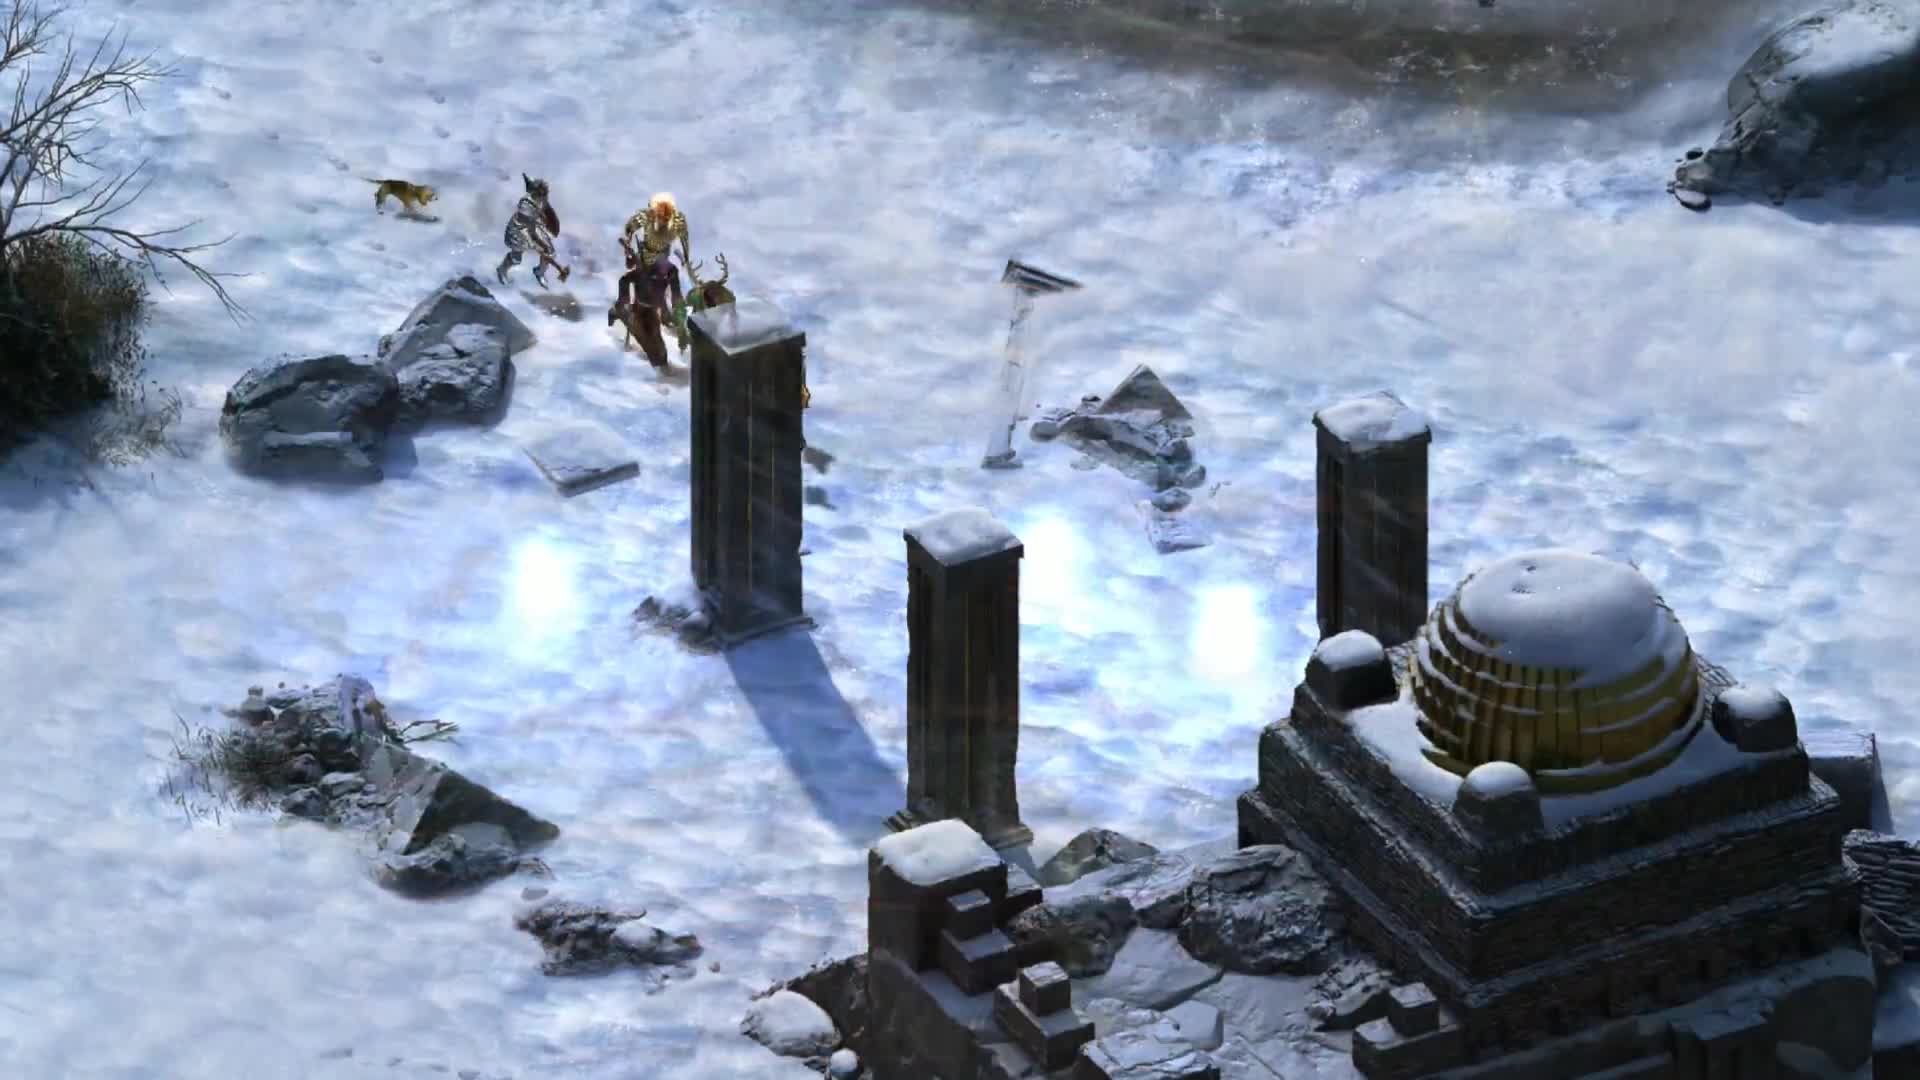 Pillars of Eternity: The White March - Part 1 trailer